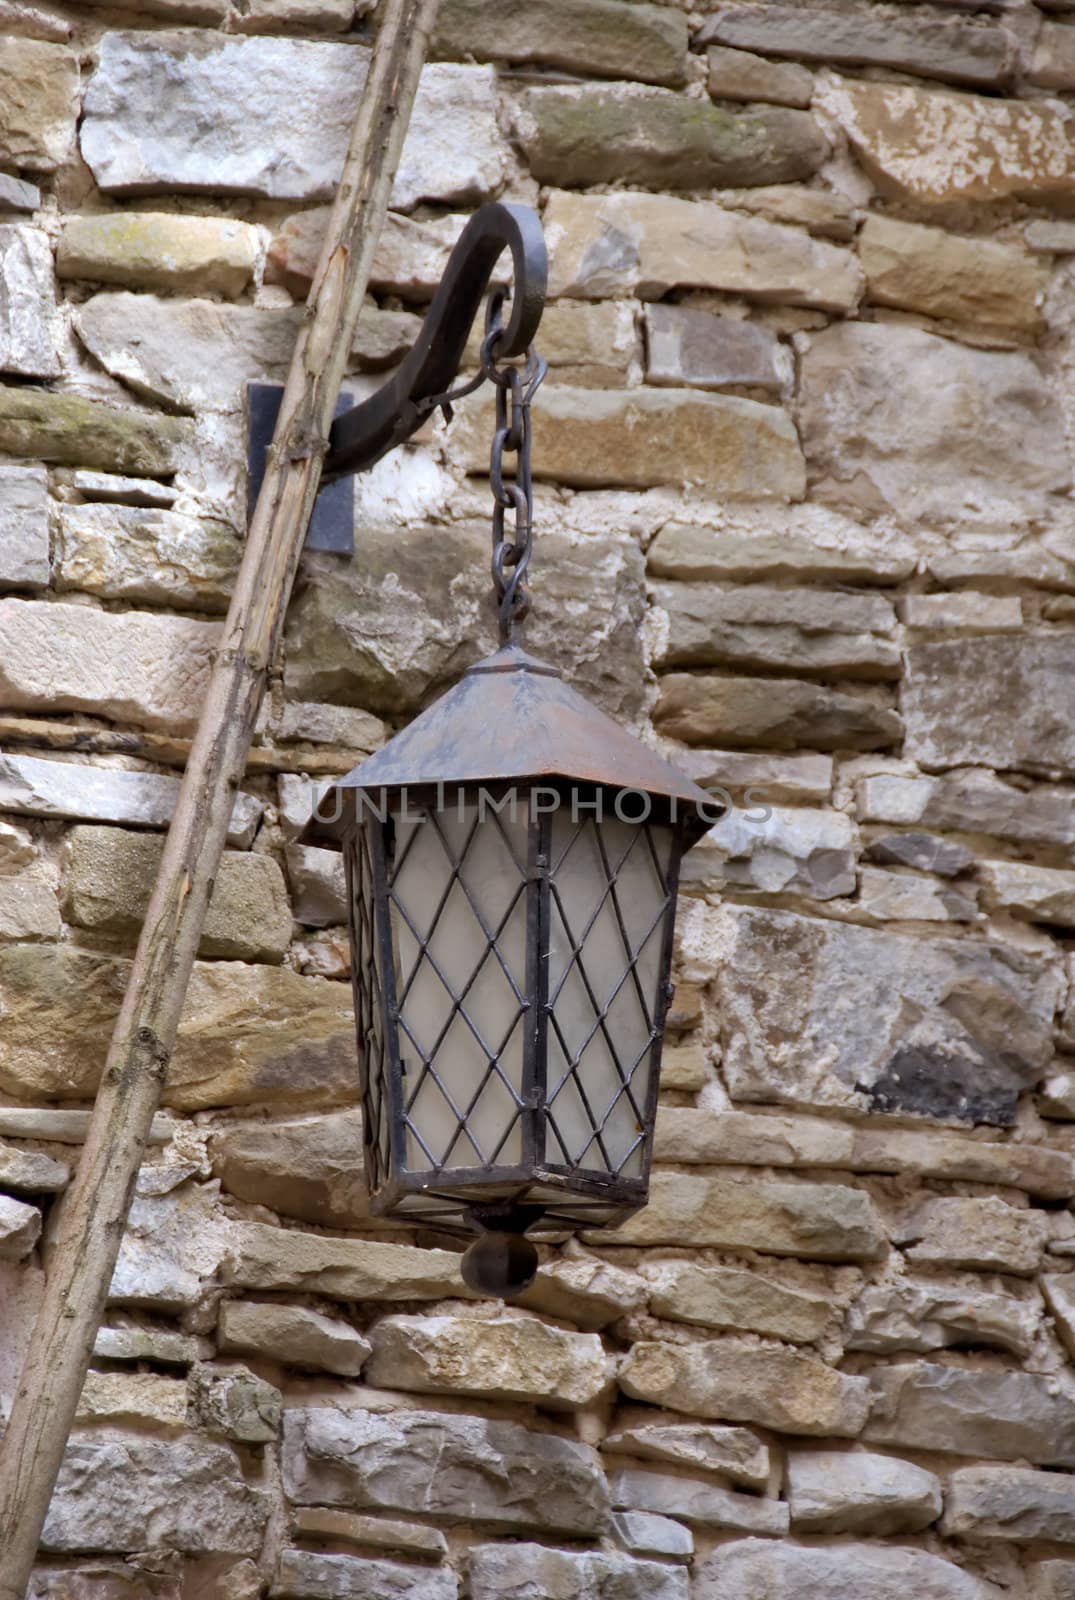 authentic historical lamp on the stone wall